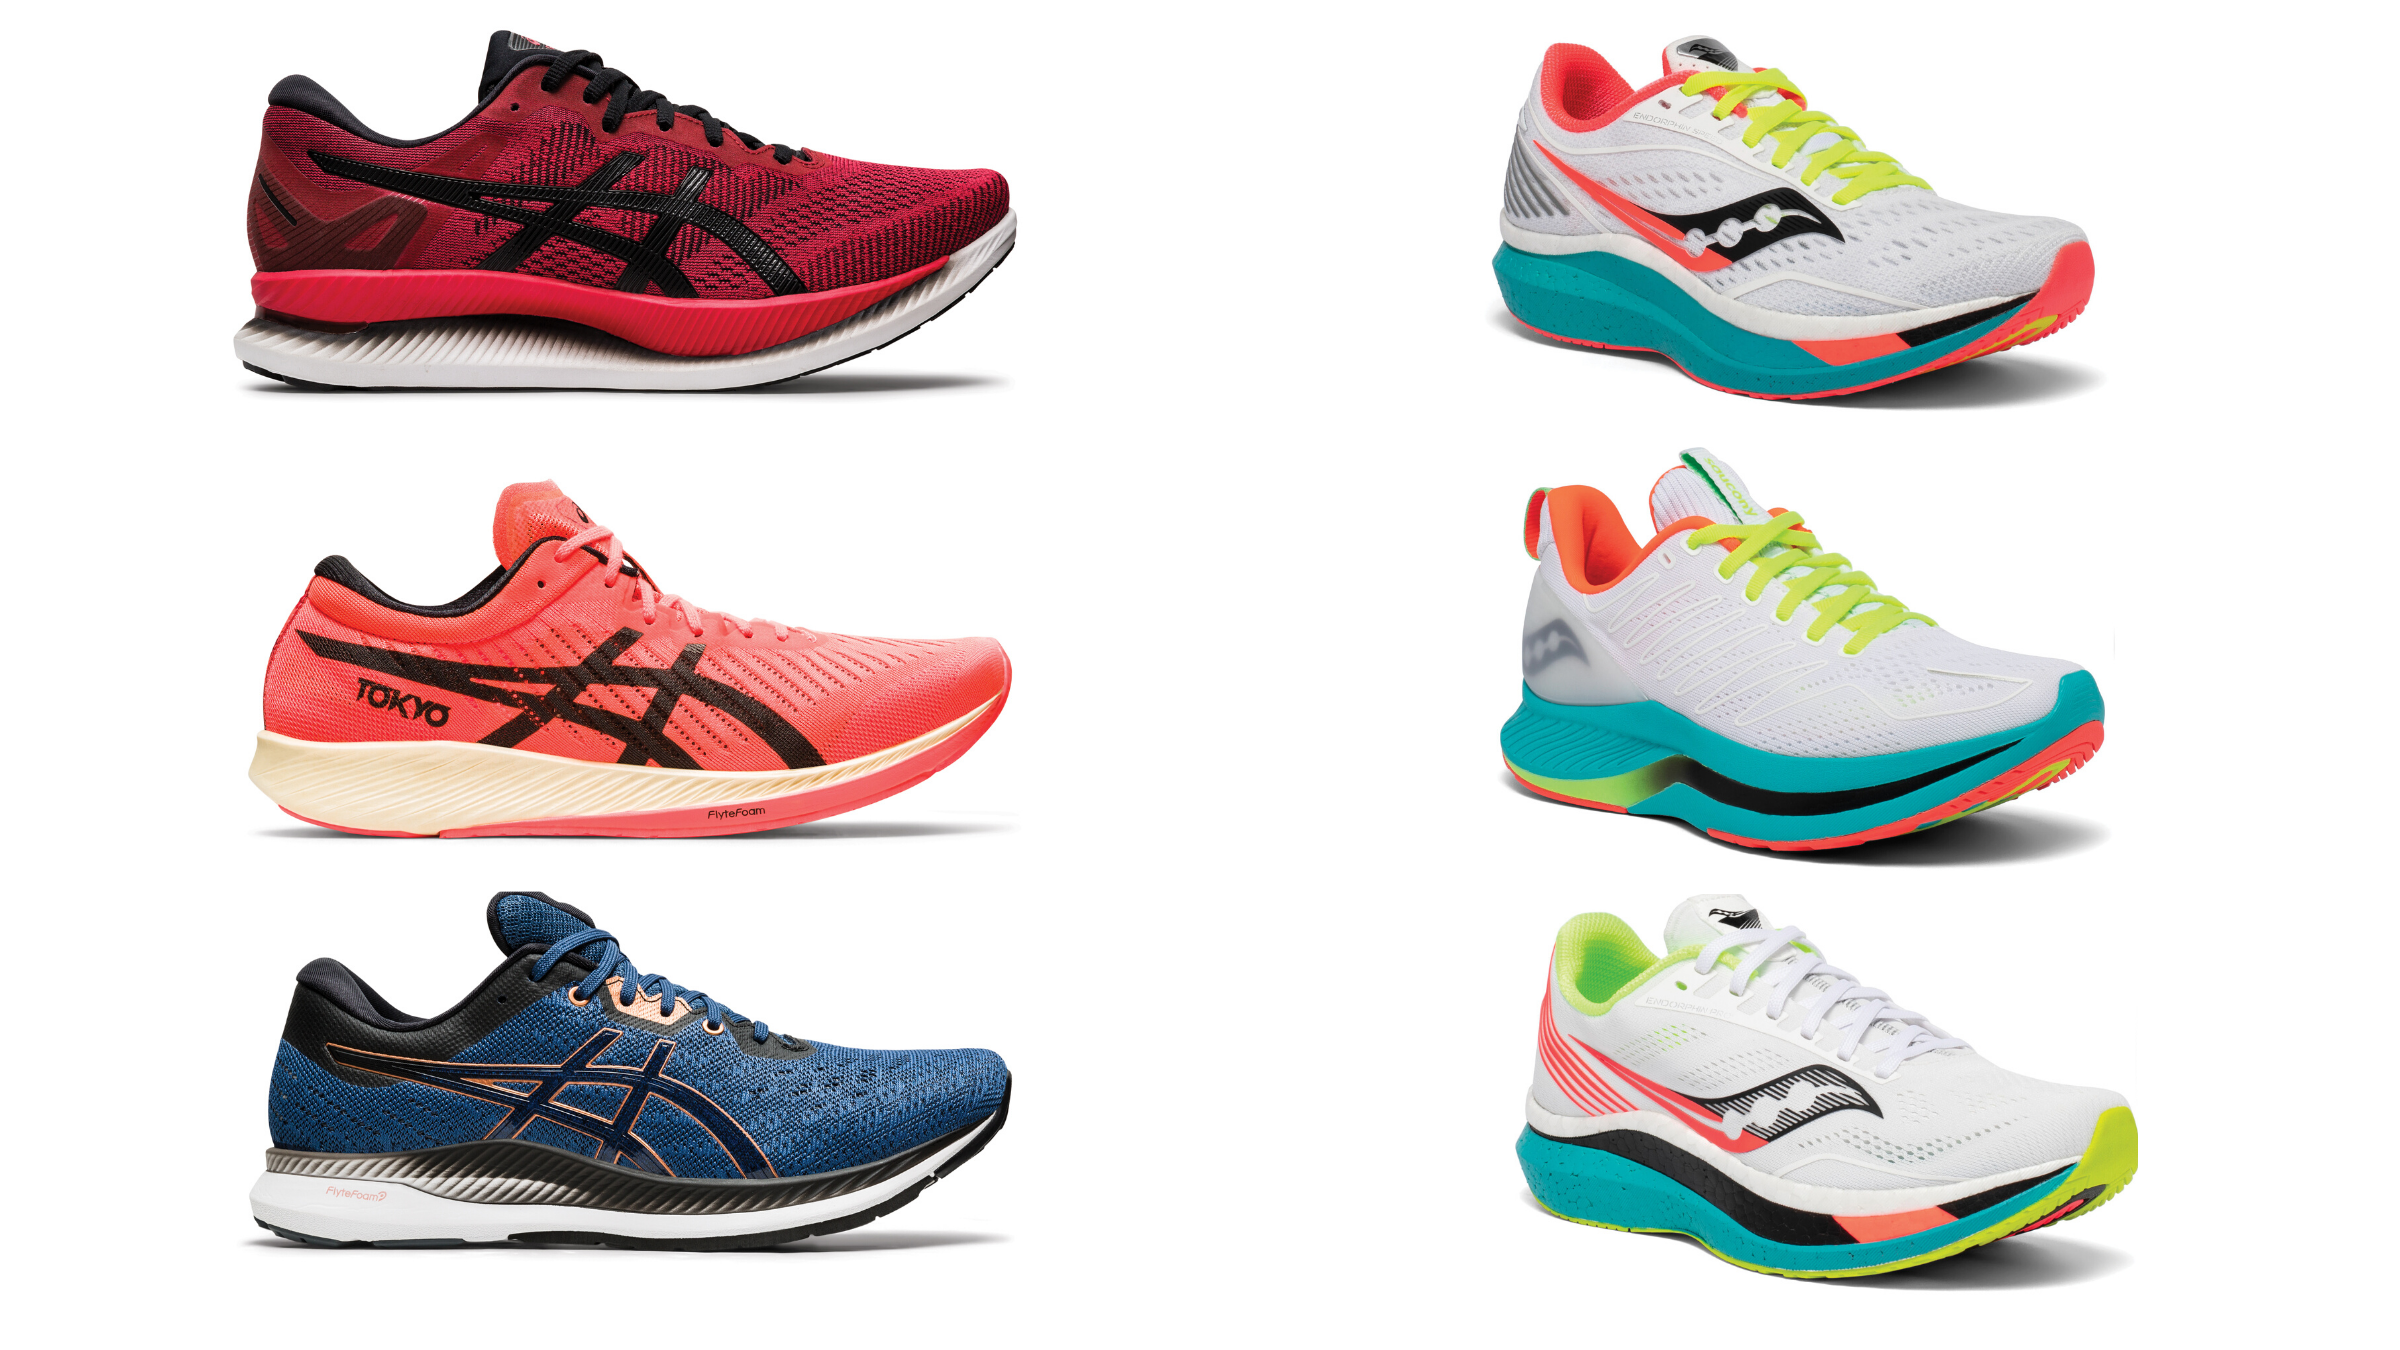 How Do Saucony Shoes Fit Compared to Asics?